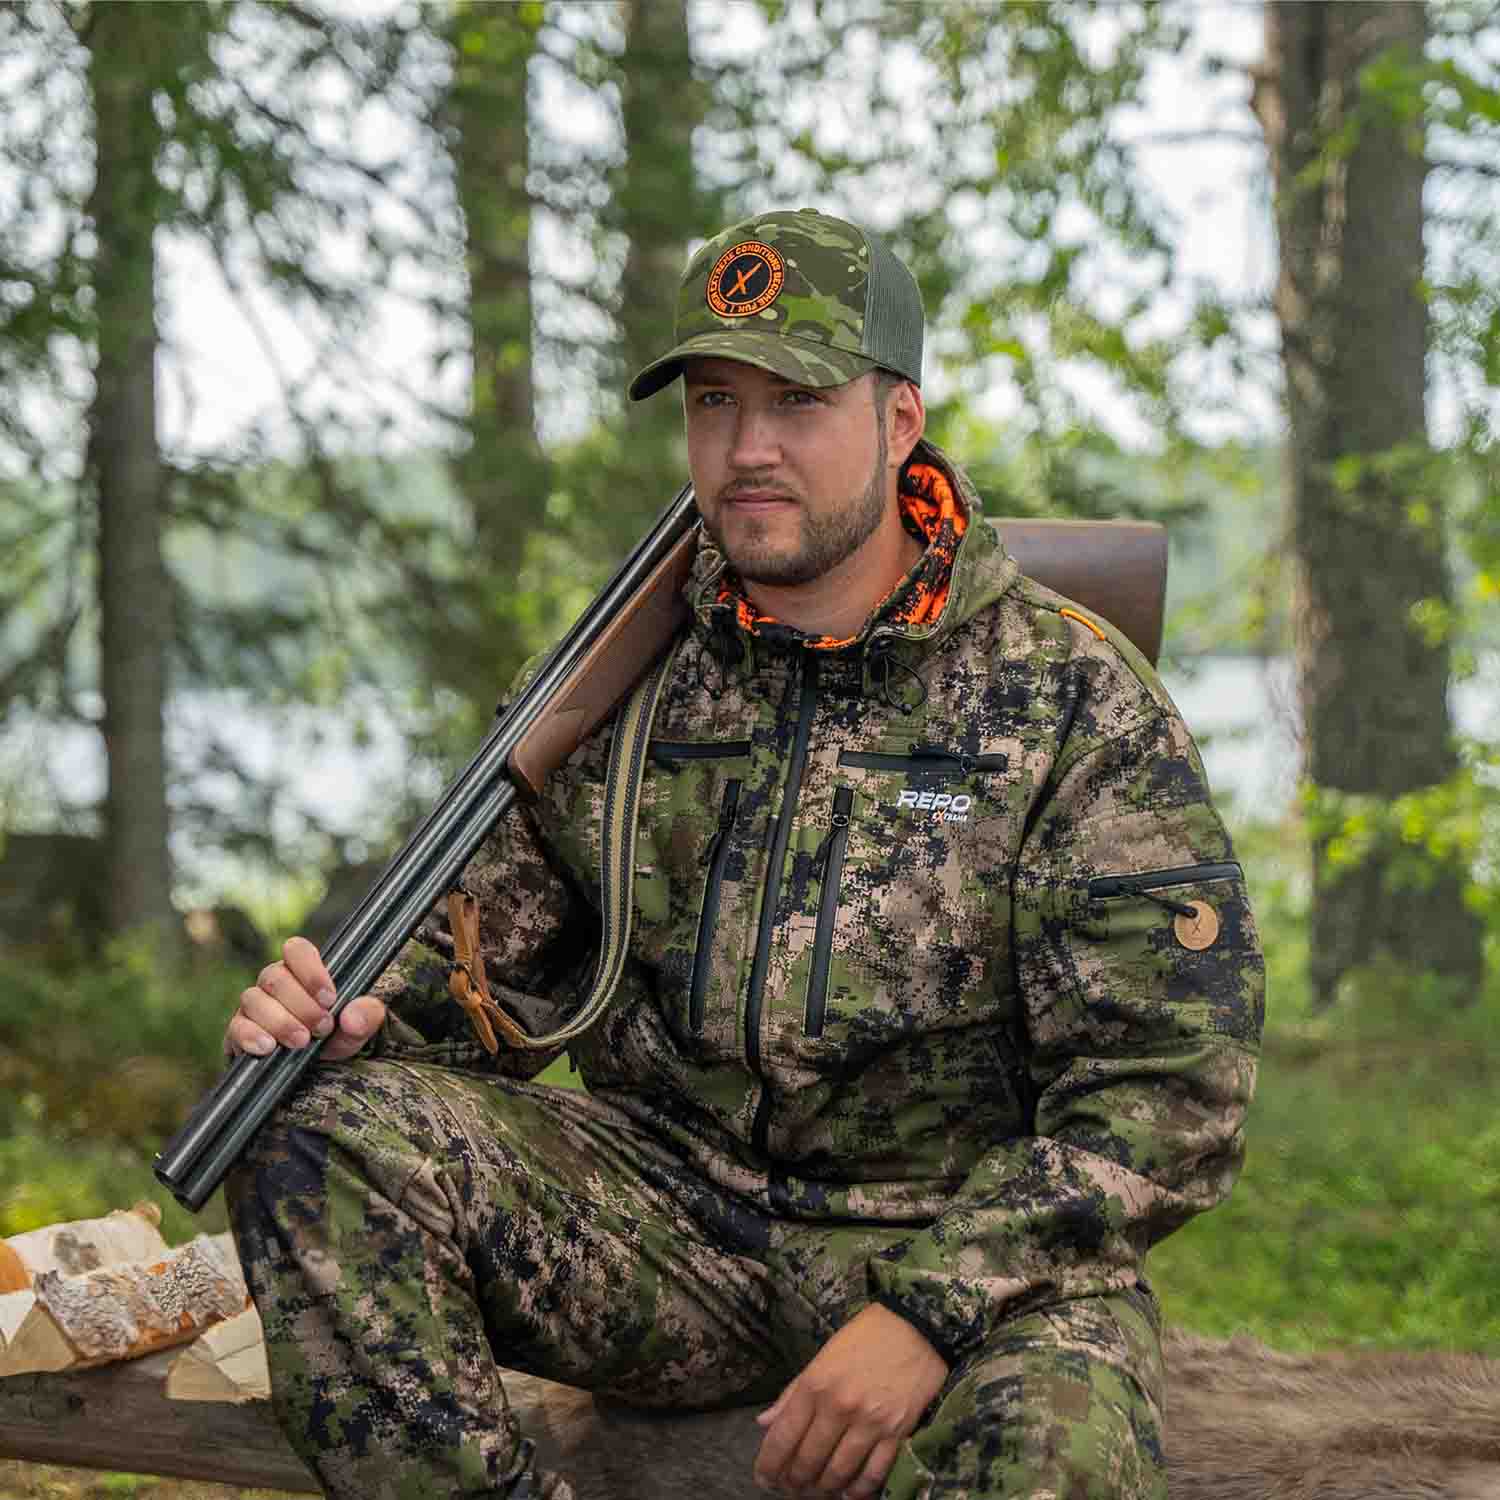 Karelia hunting suit and Repo mesh cap on a hunter